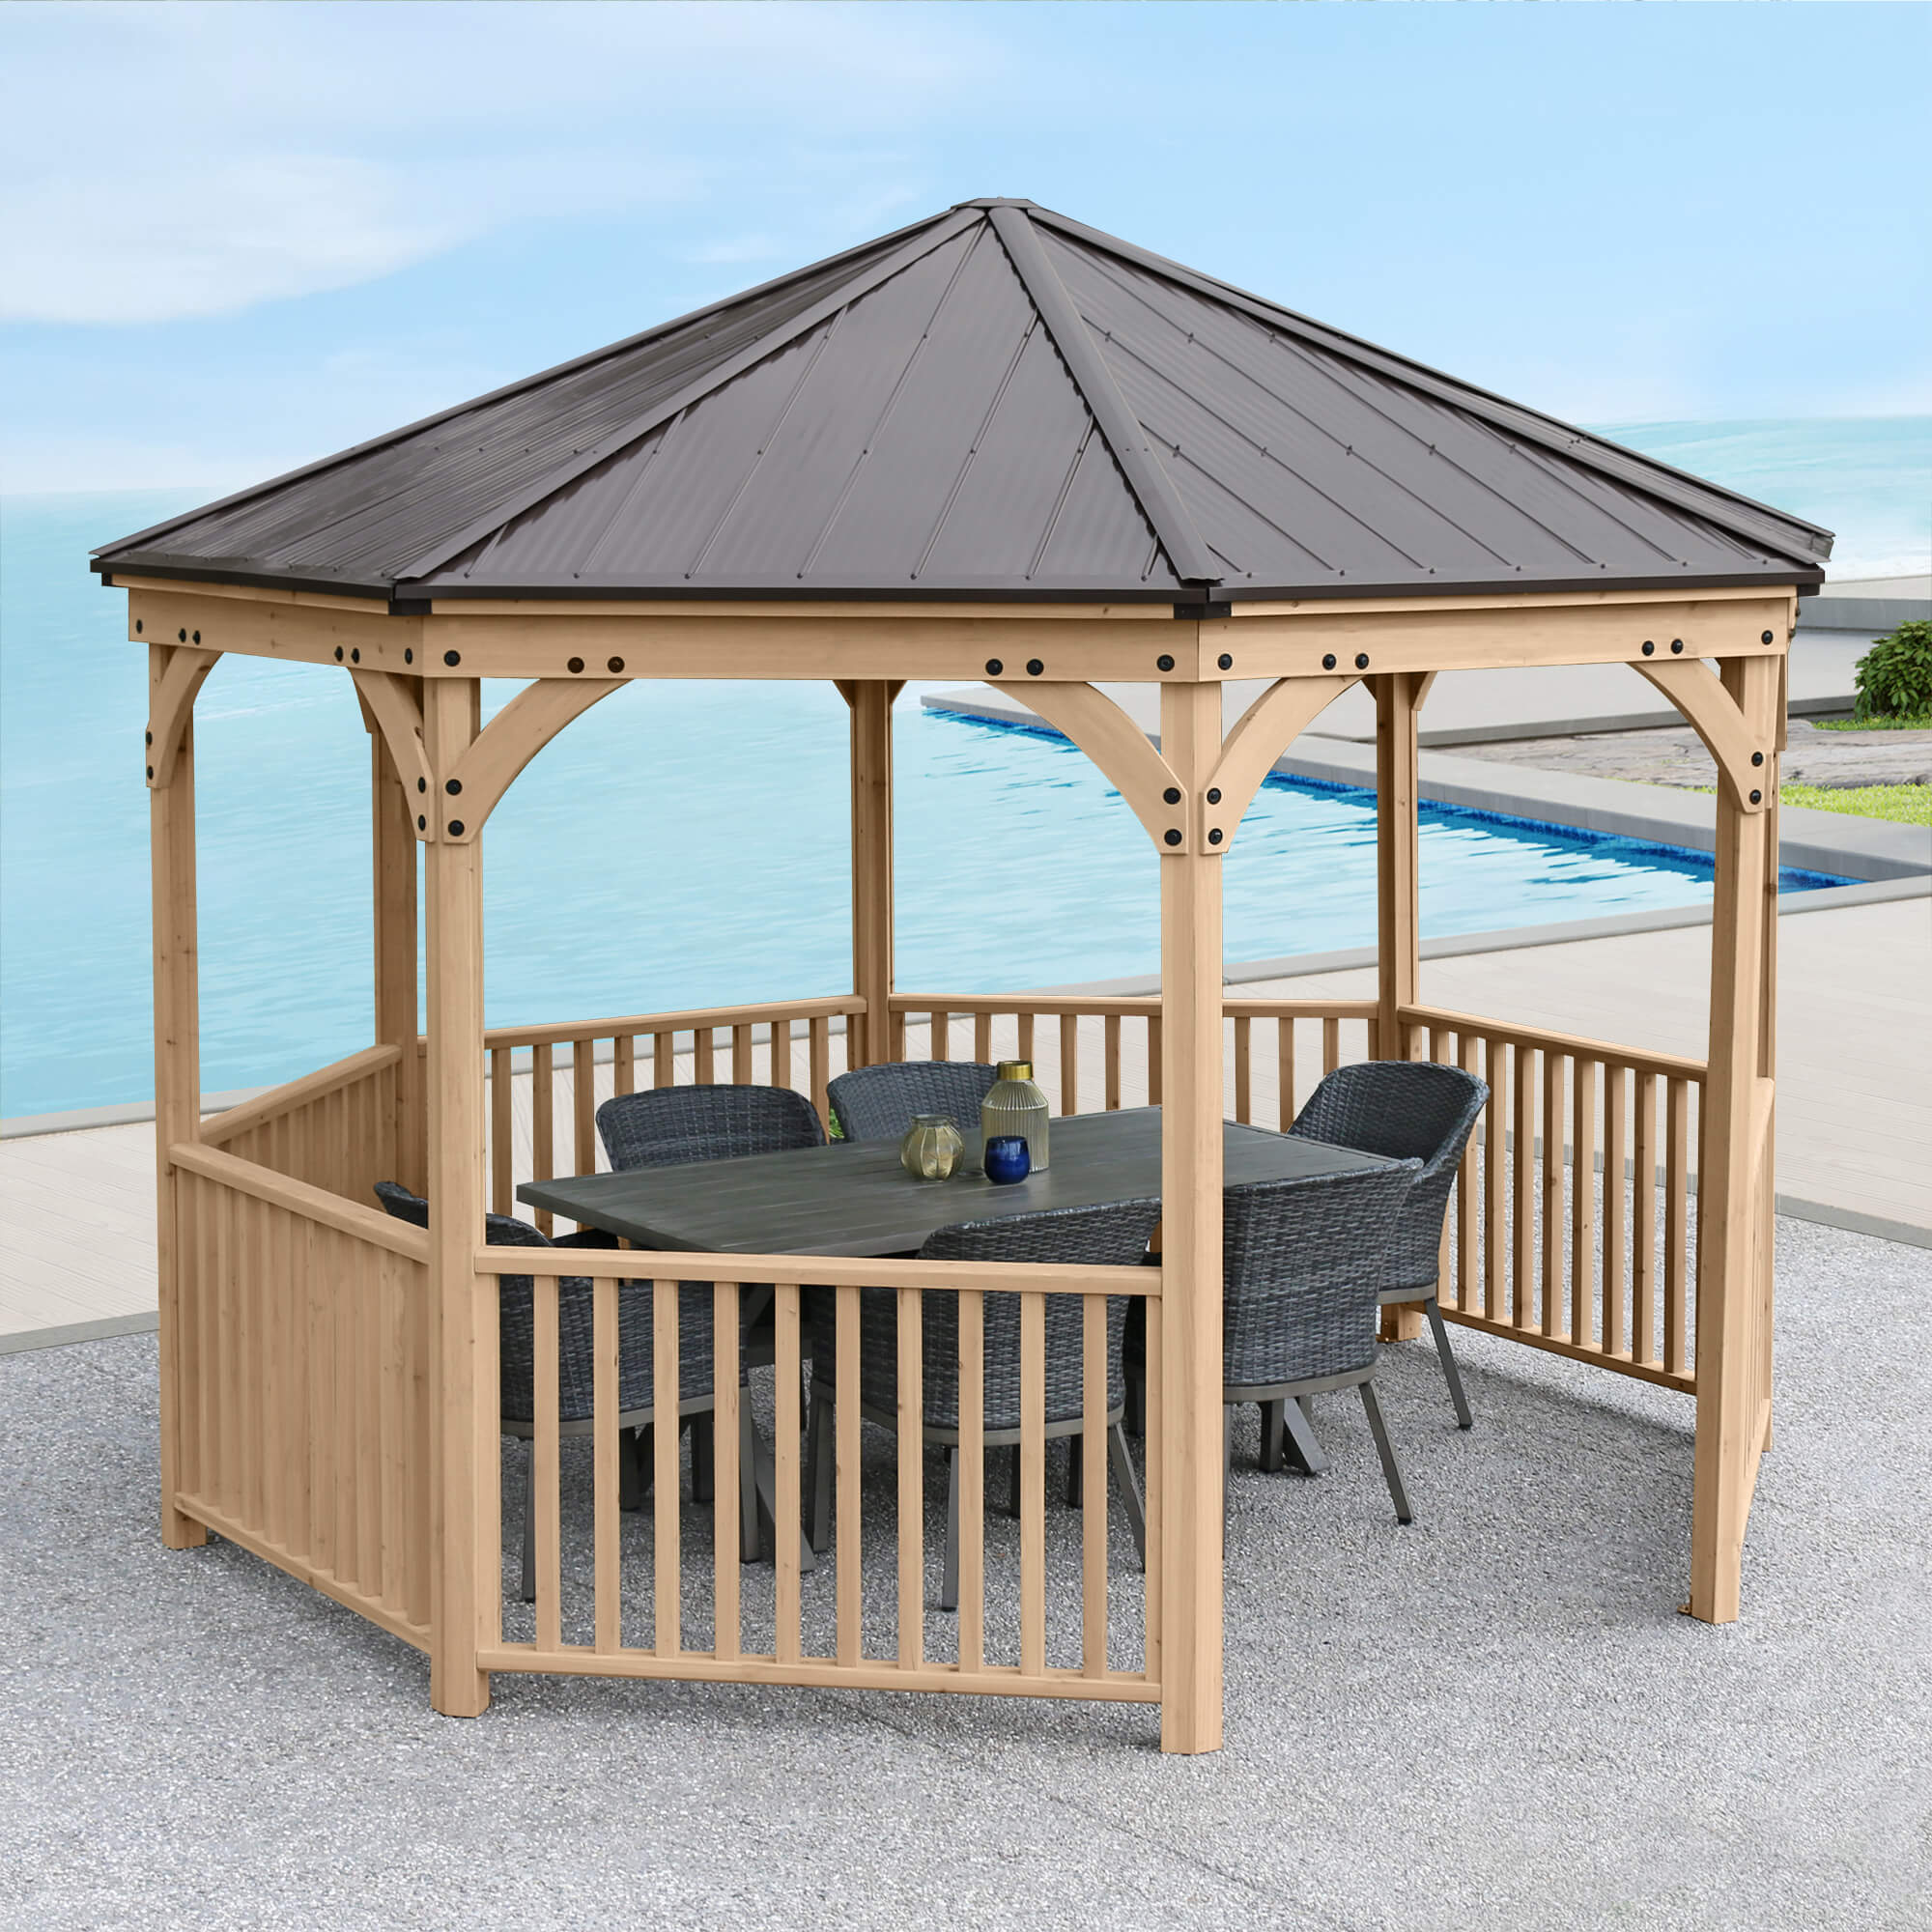 Yardistry Octagon 12ft Gazebo placed beside a pool with chairs & a table.